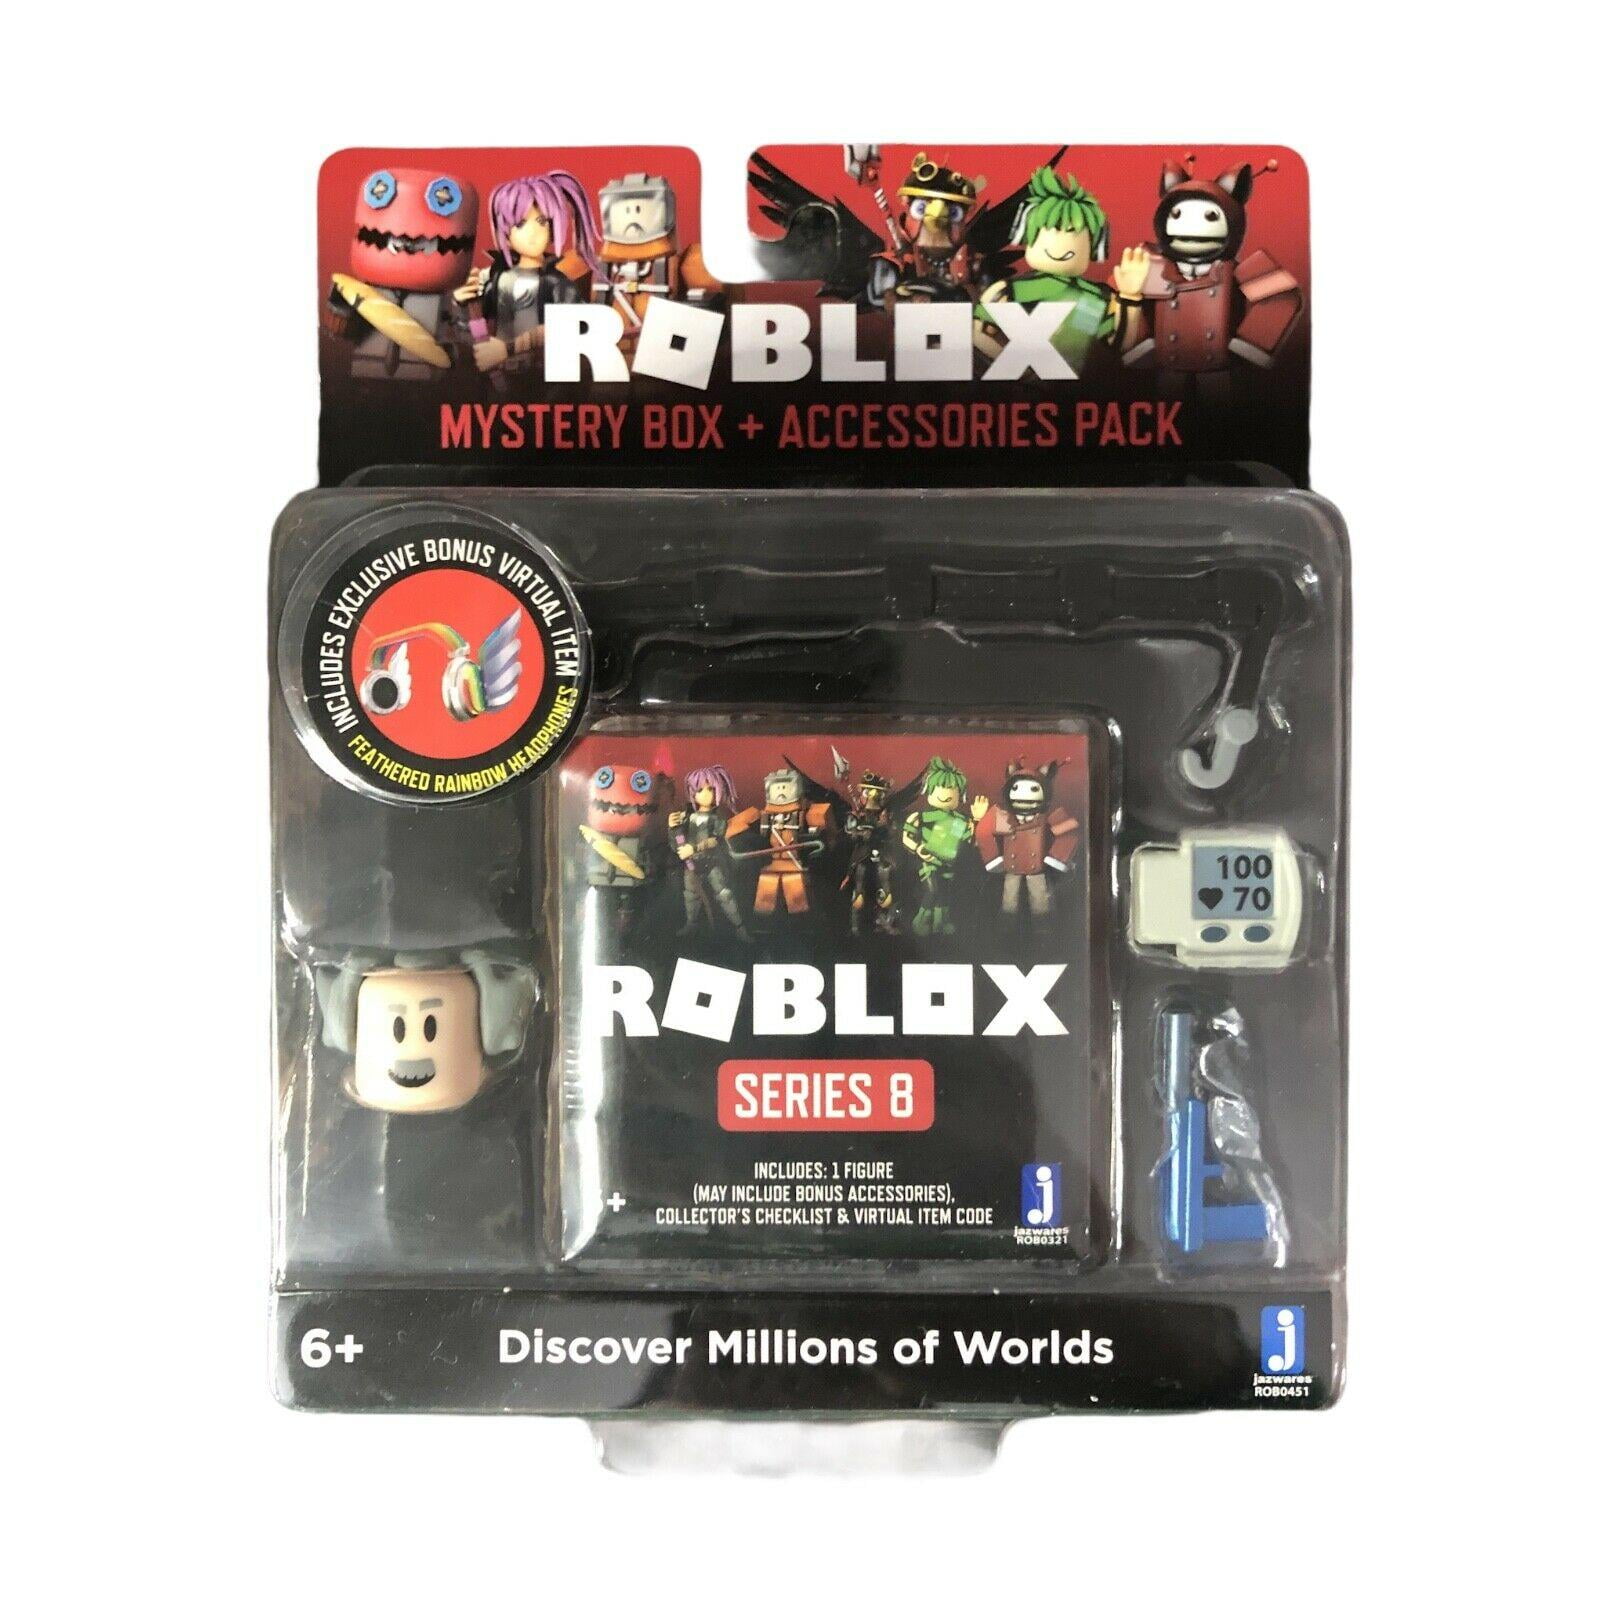 Roblox Series 8 Mystery Box Pack, 2 VIRTUAL ITEM CODES, 1 figures, 4